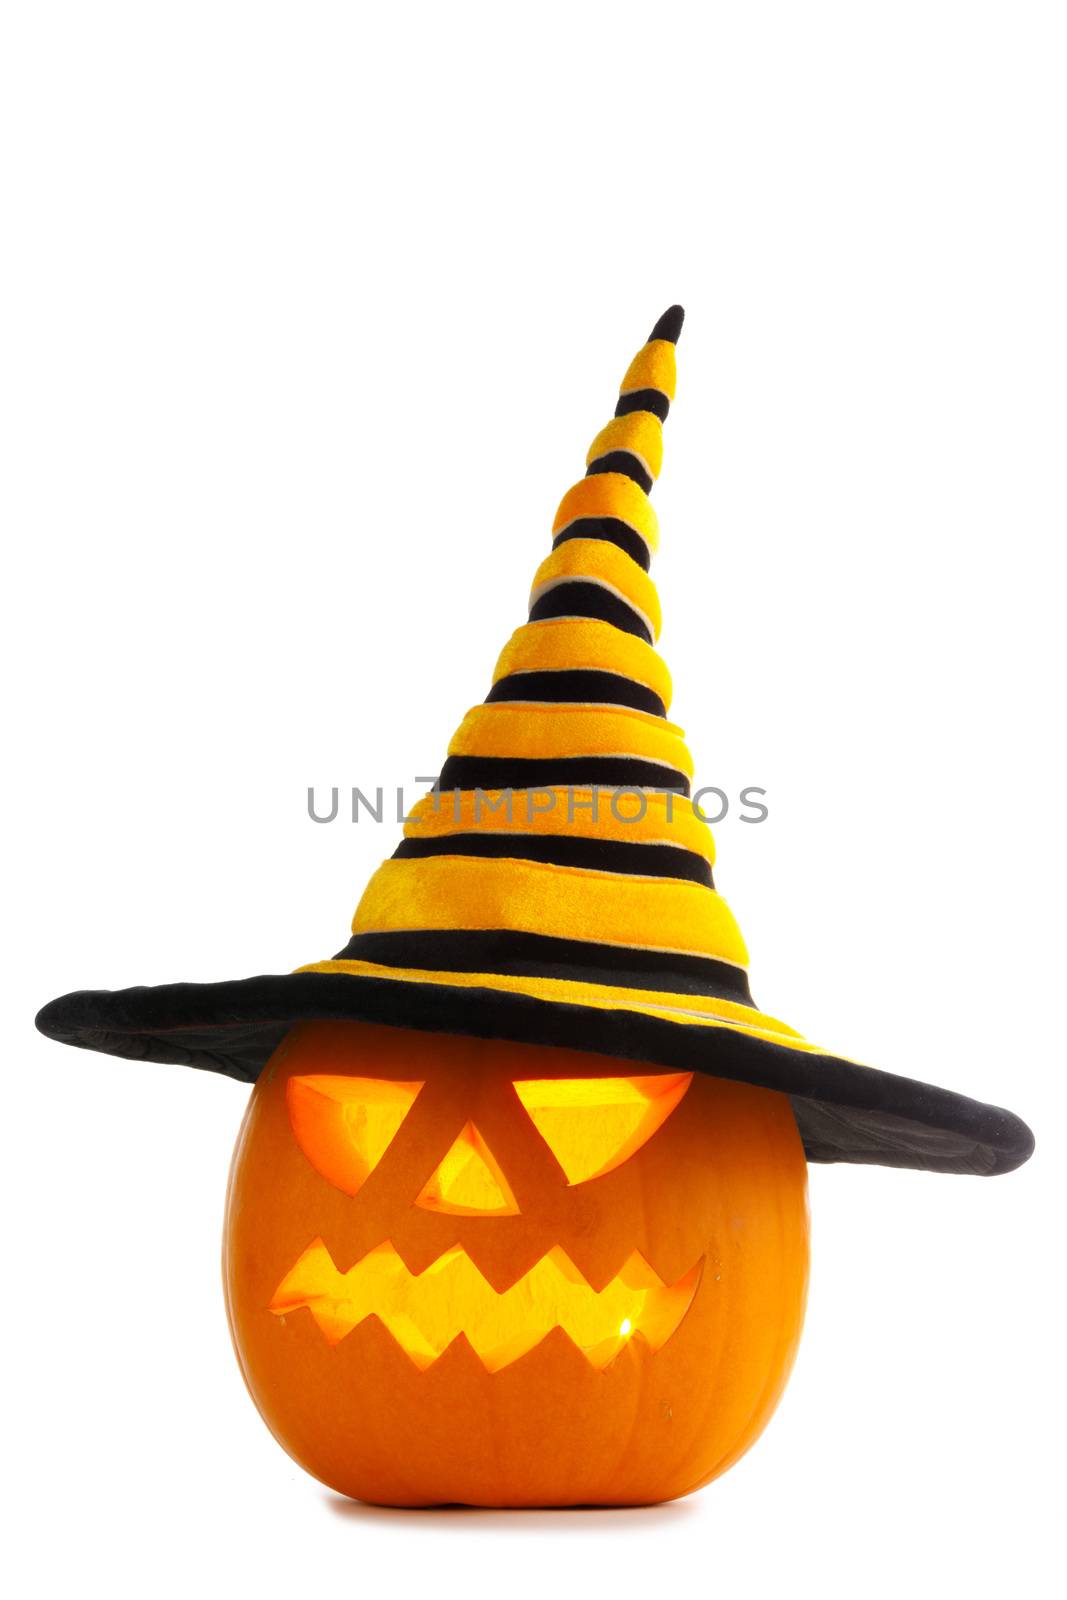 Halloween pumpkin with witches hat by Yellowj